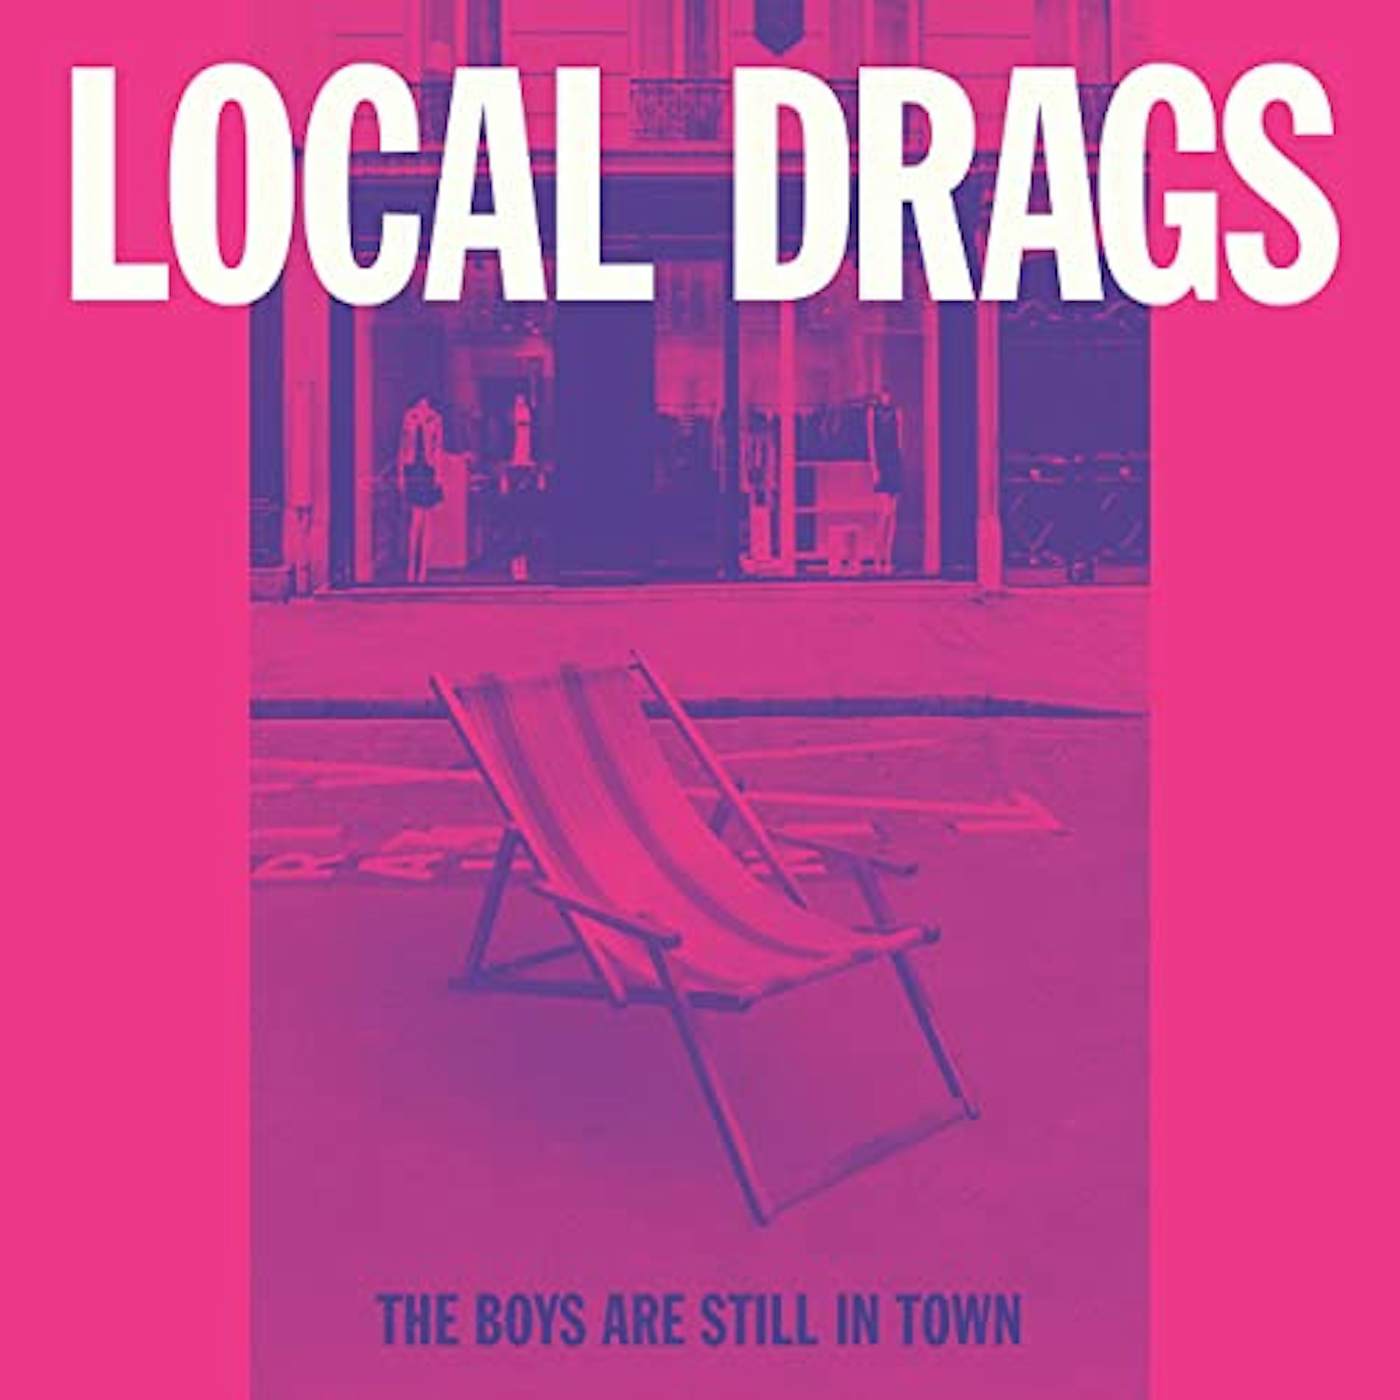 Local Drags Boys are still in town Vinyl Record